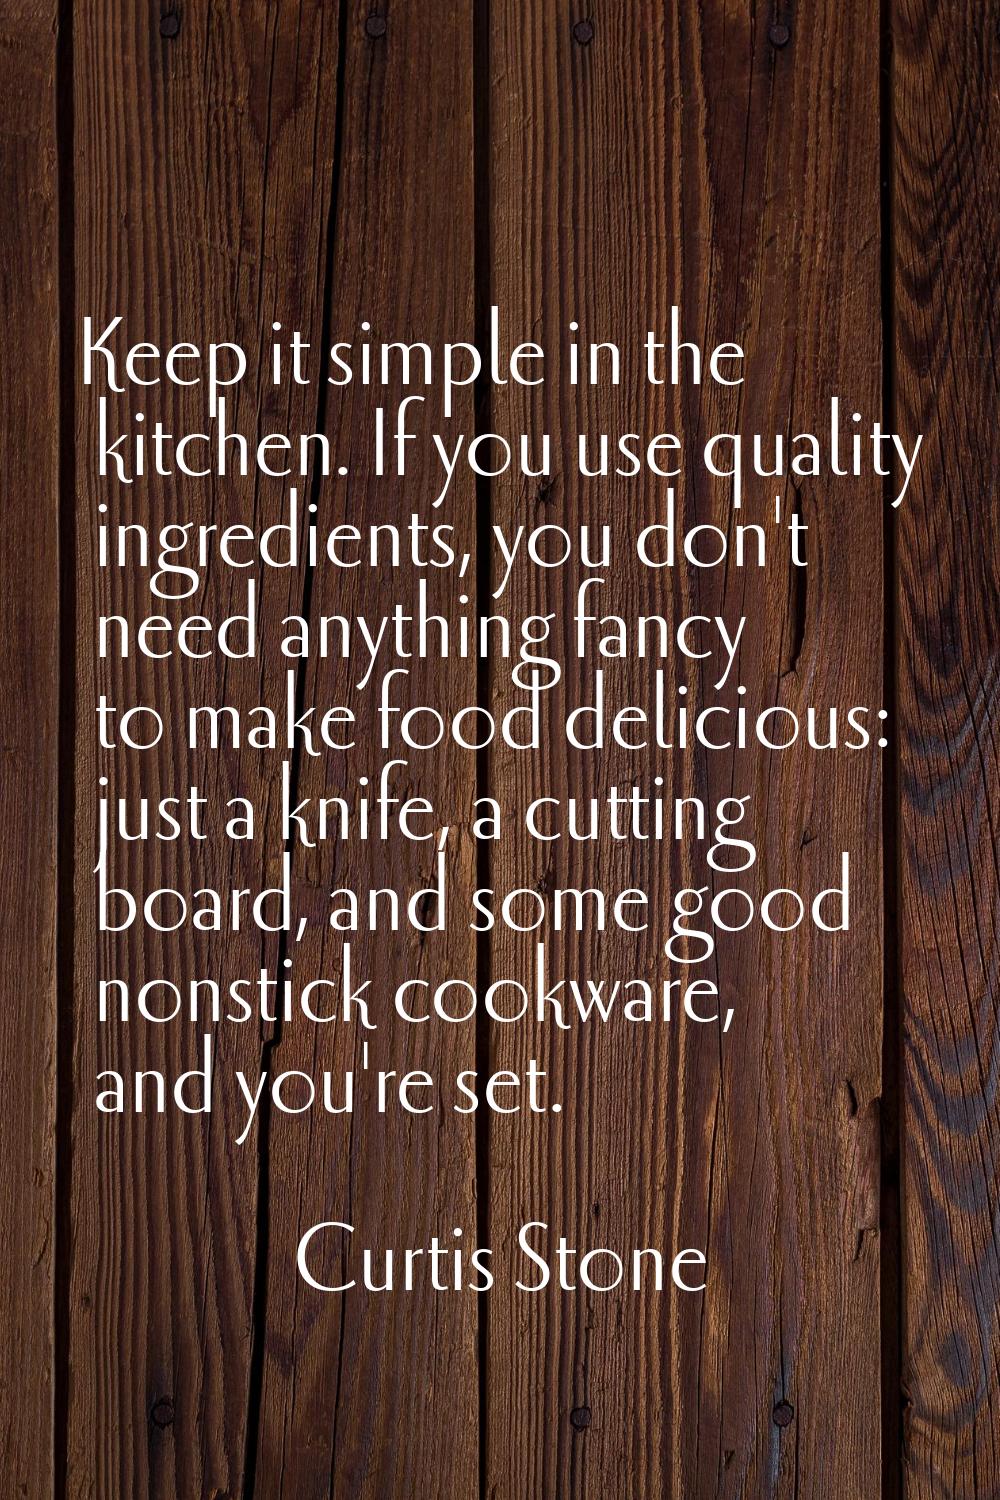 Keep it simple in the kitchen. If you use quality ingredients, you don't need anything fancy to mak